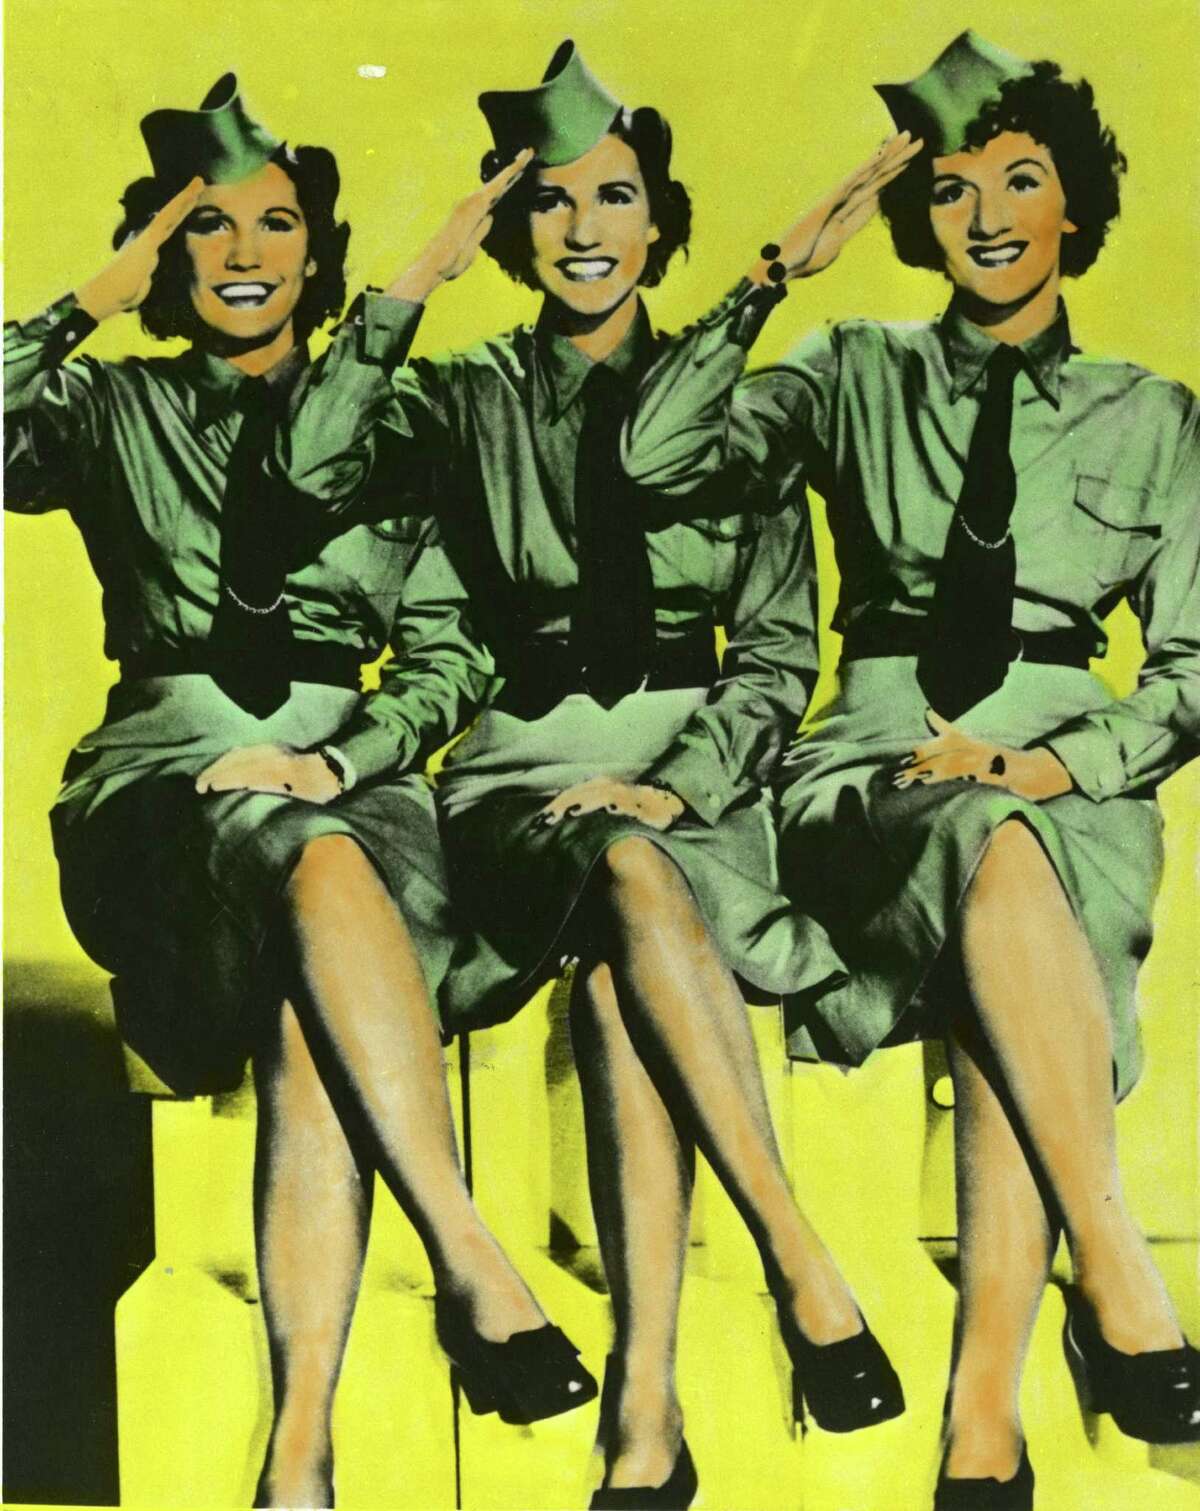 The Andrews Sisters made "Winter Wonderland" a holiday staple.